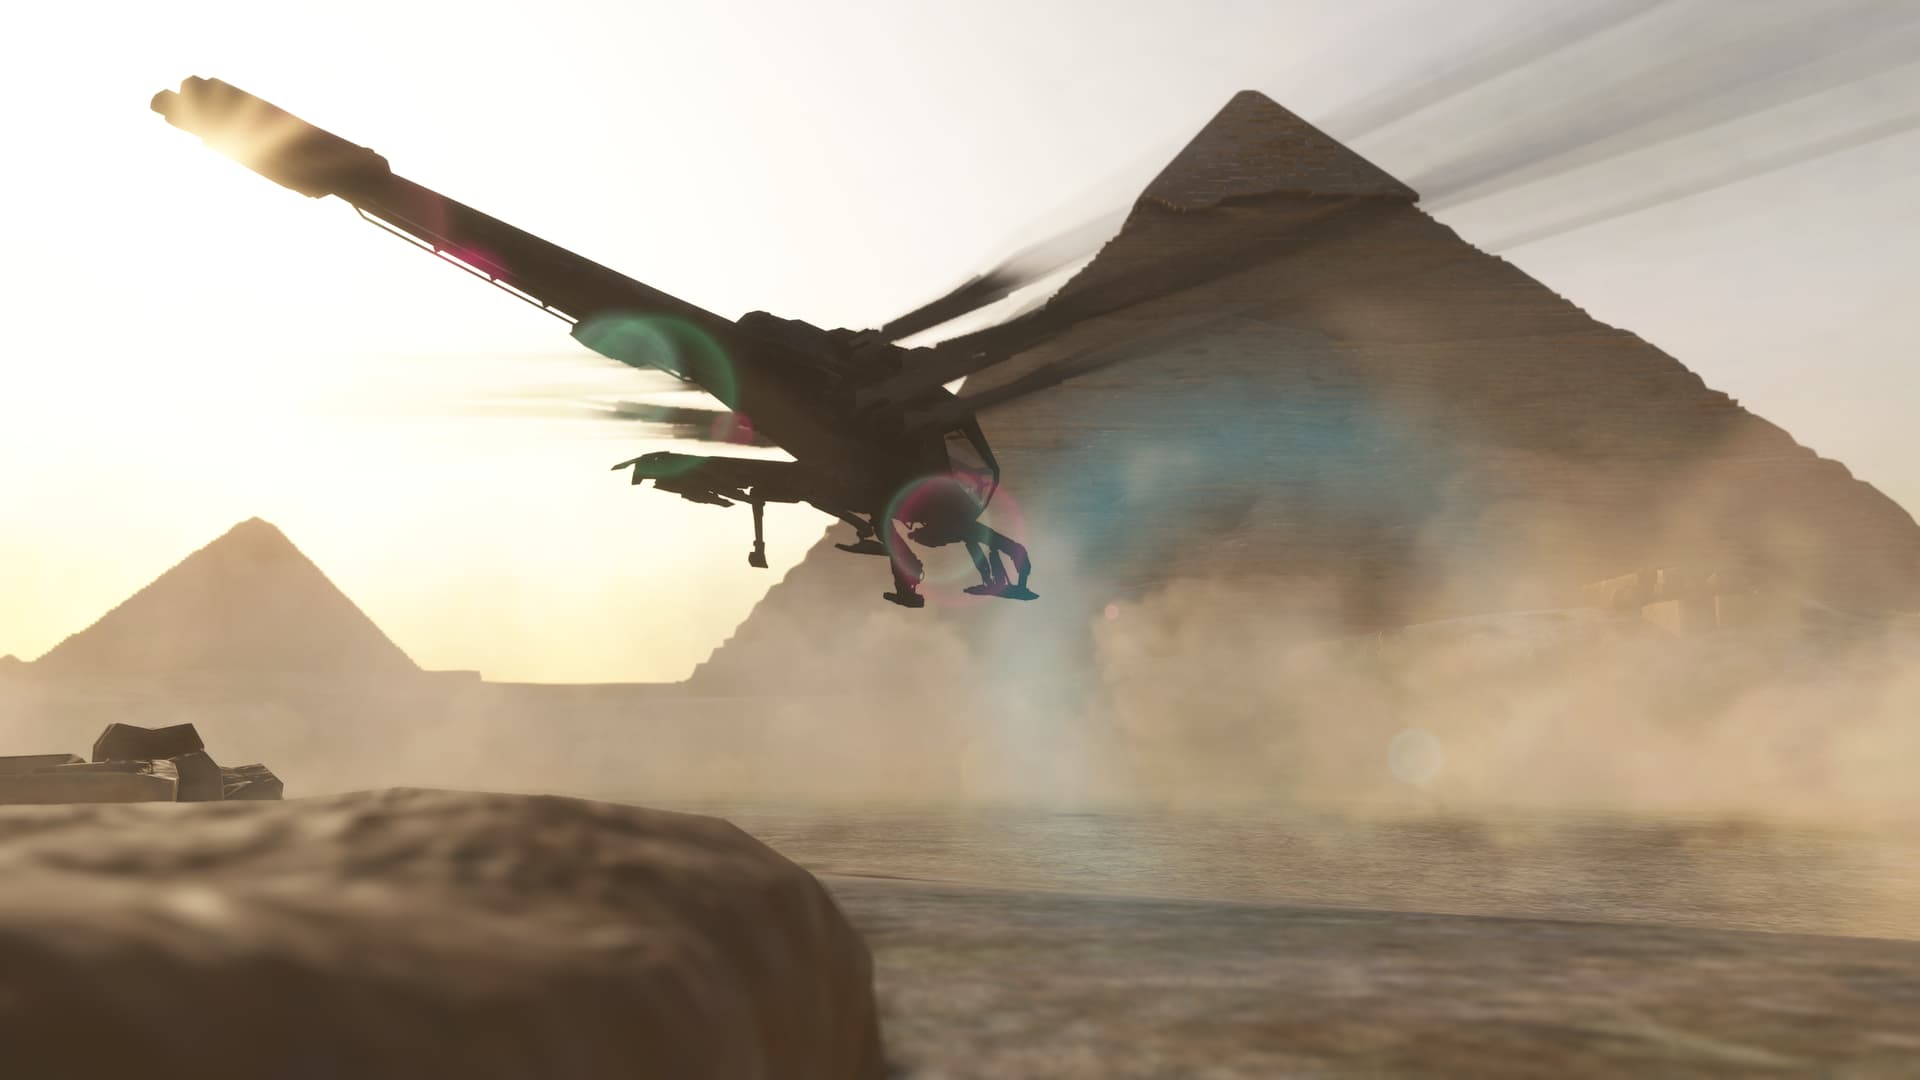 The Ornithopter flies close to the ancient pyramids in Cairo, Egypt.